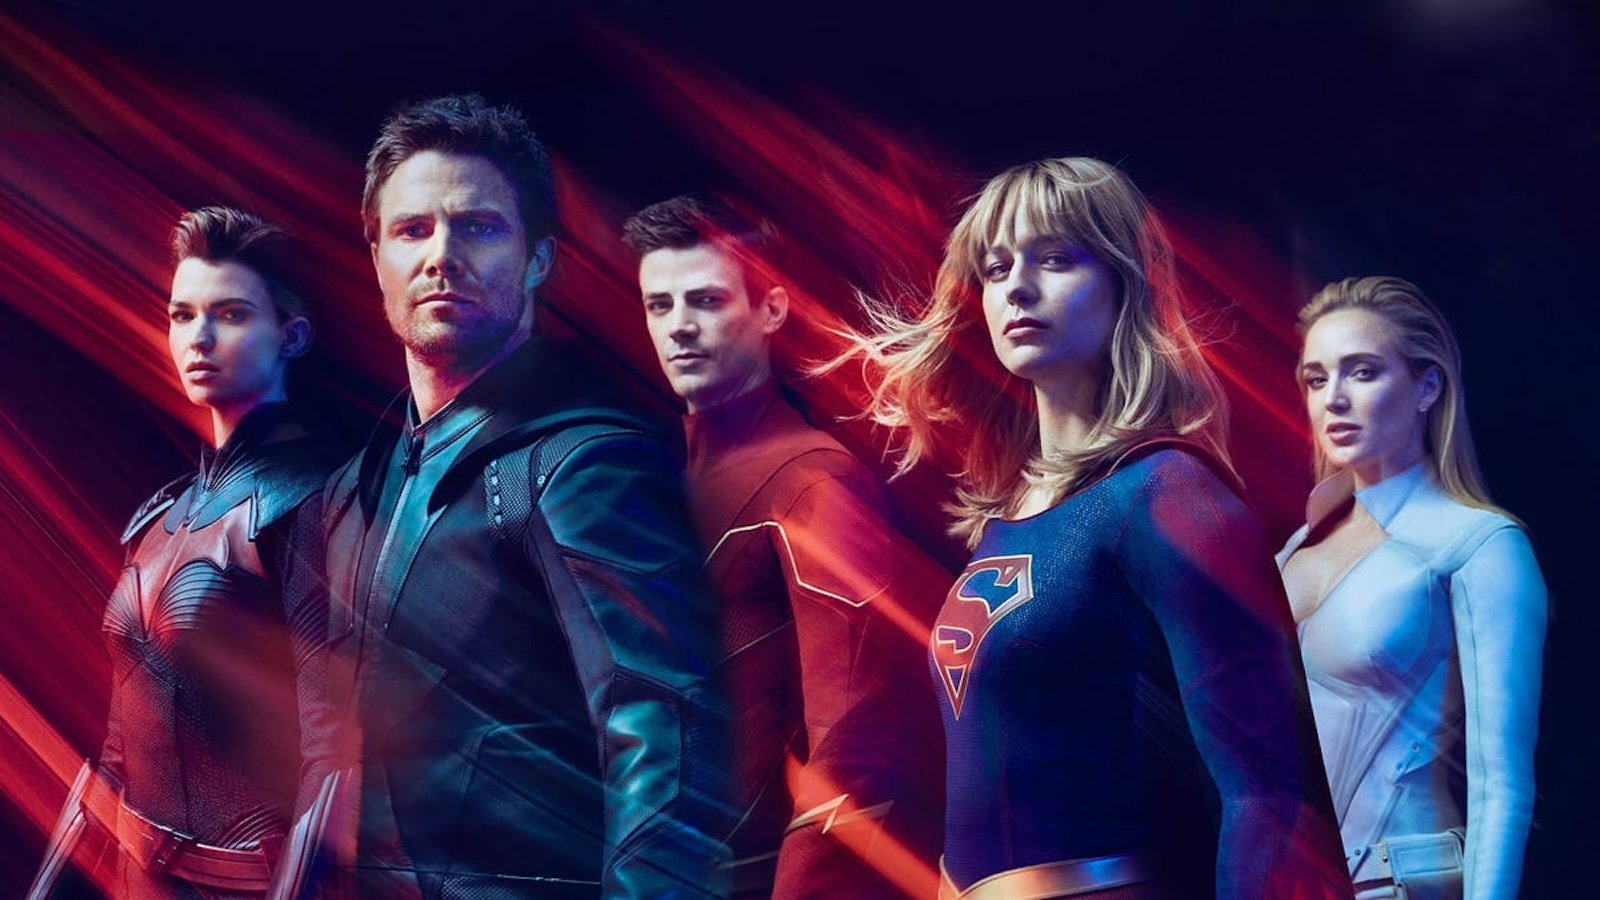 Arrowverse: The CW announces the end of the franchise after 11 years